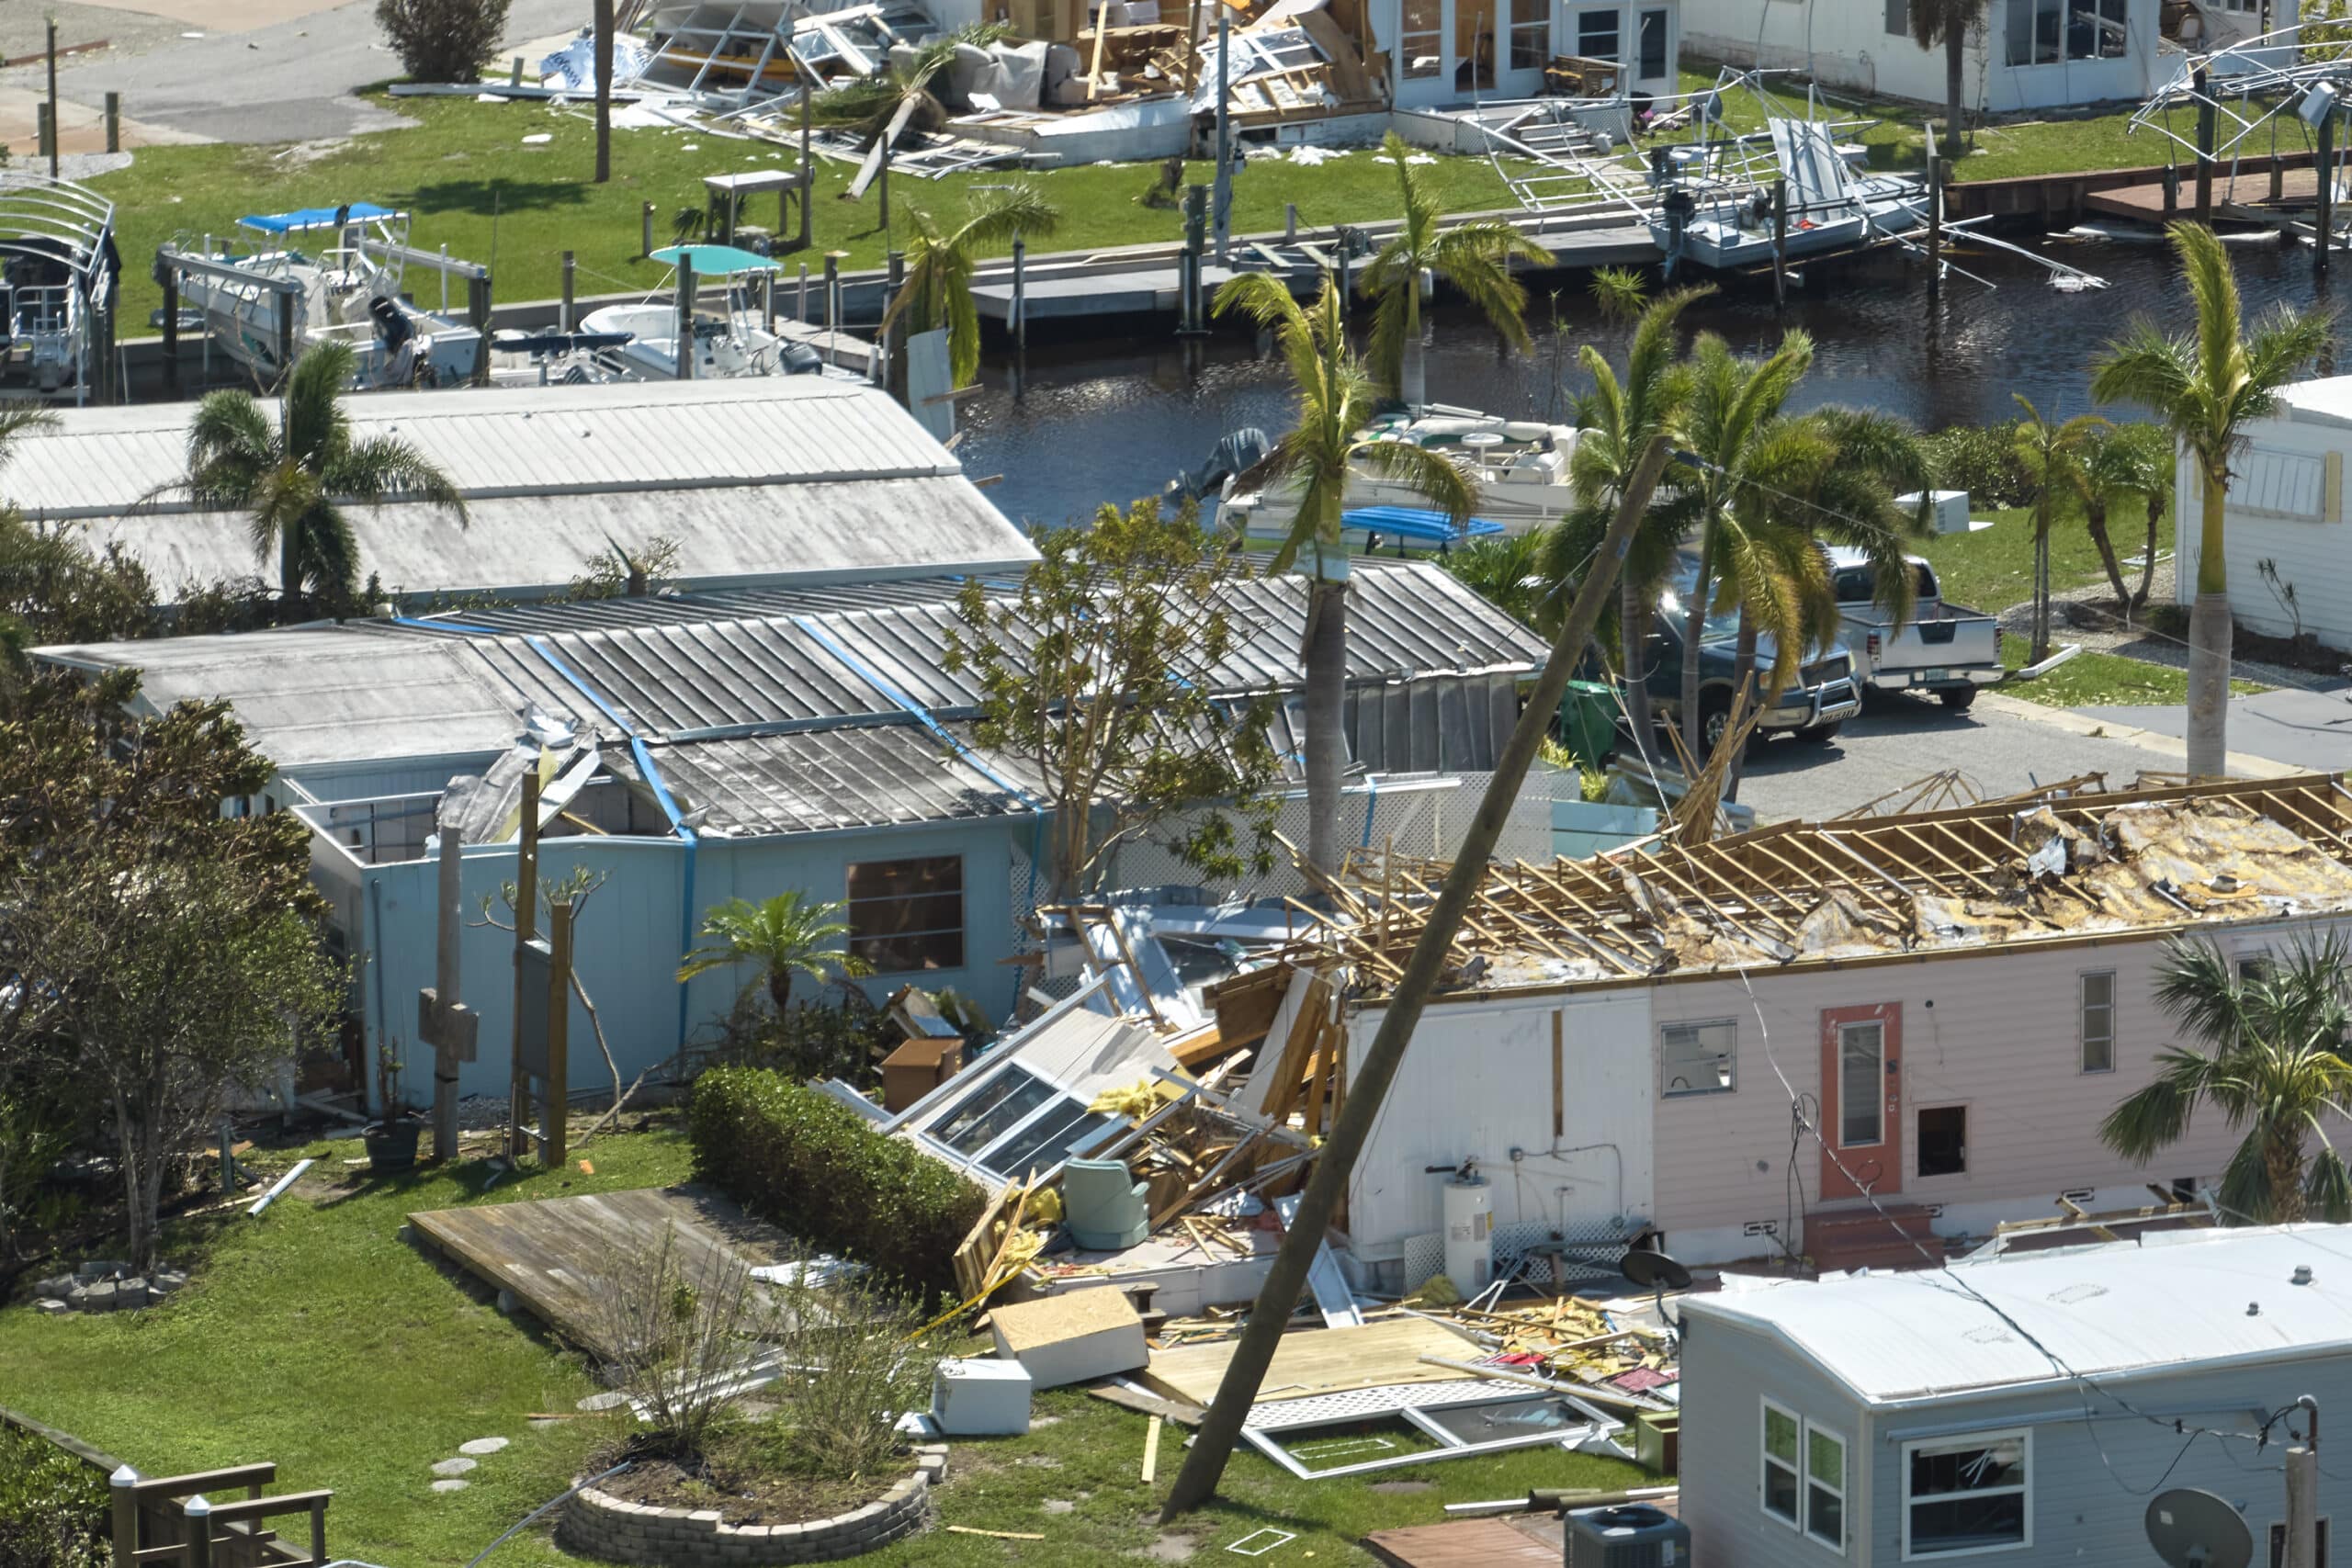 Destroyed family homes in Ft. Myers, FL due to Hurricane Ian